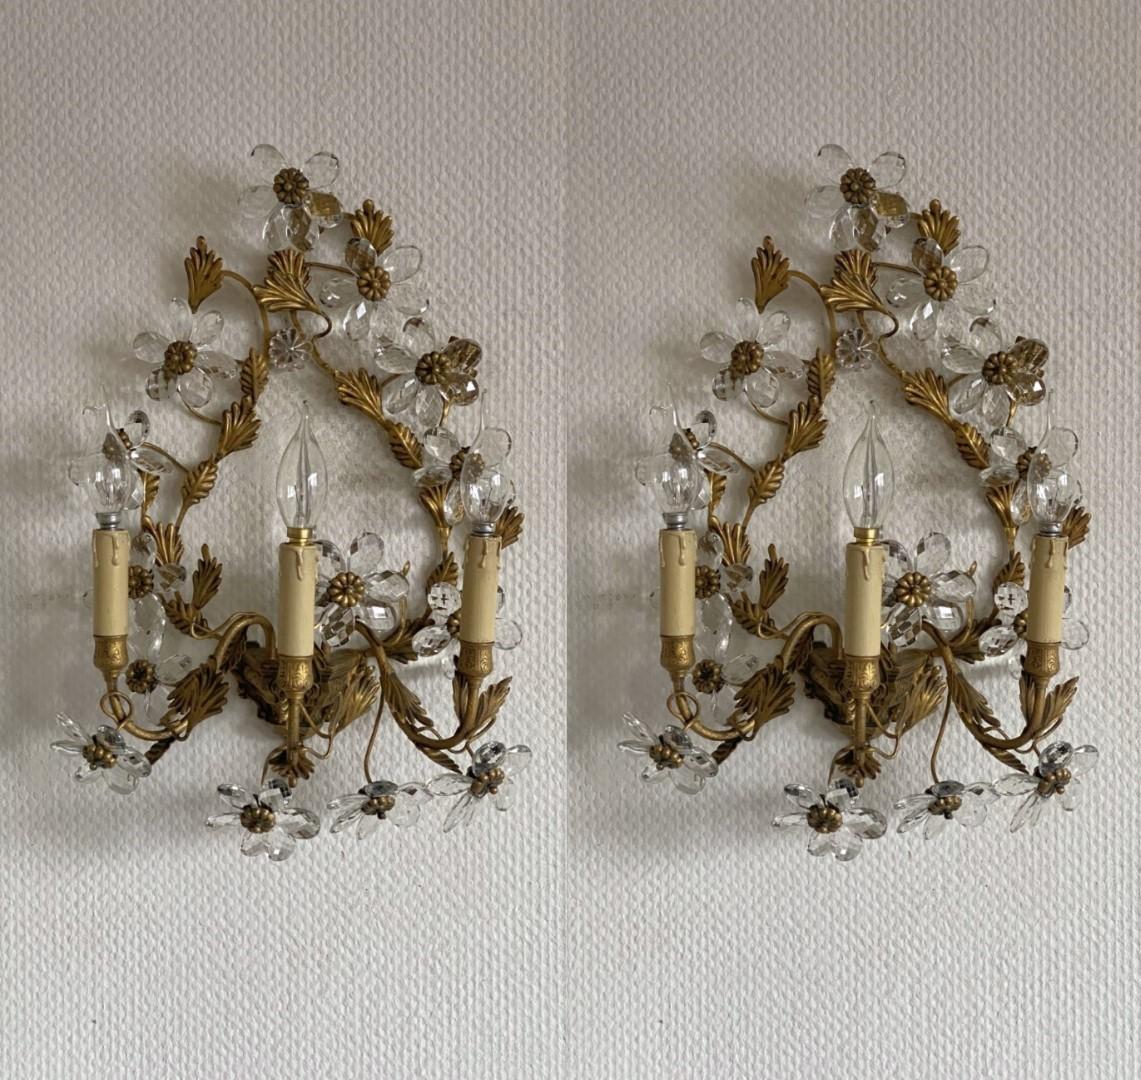 Pair of Large Maison Baguès Wrought Iron Crystal Flower Wall Sconces, 1930s In Good Condition For Sale In Frankfurt am Main, DE